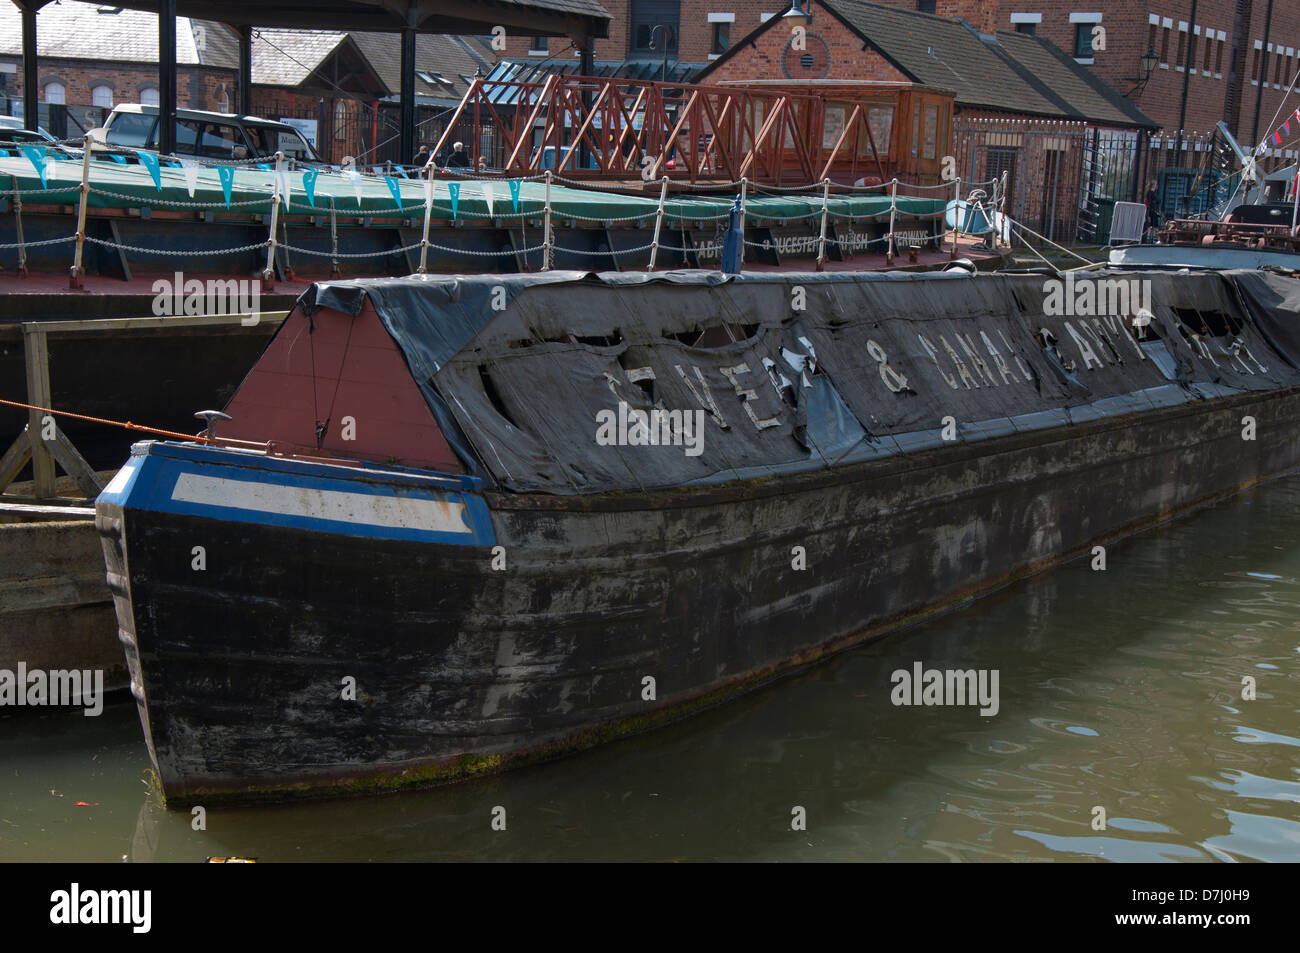 canal boat, old working boat,old cargo boat, worn, tired, berthed, tattered tarpaulins Stock Photo